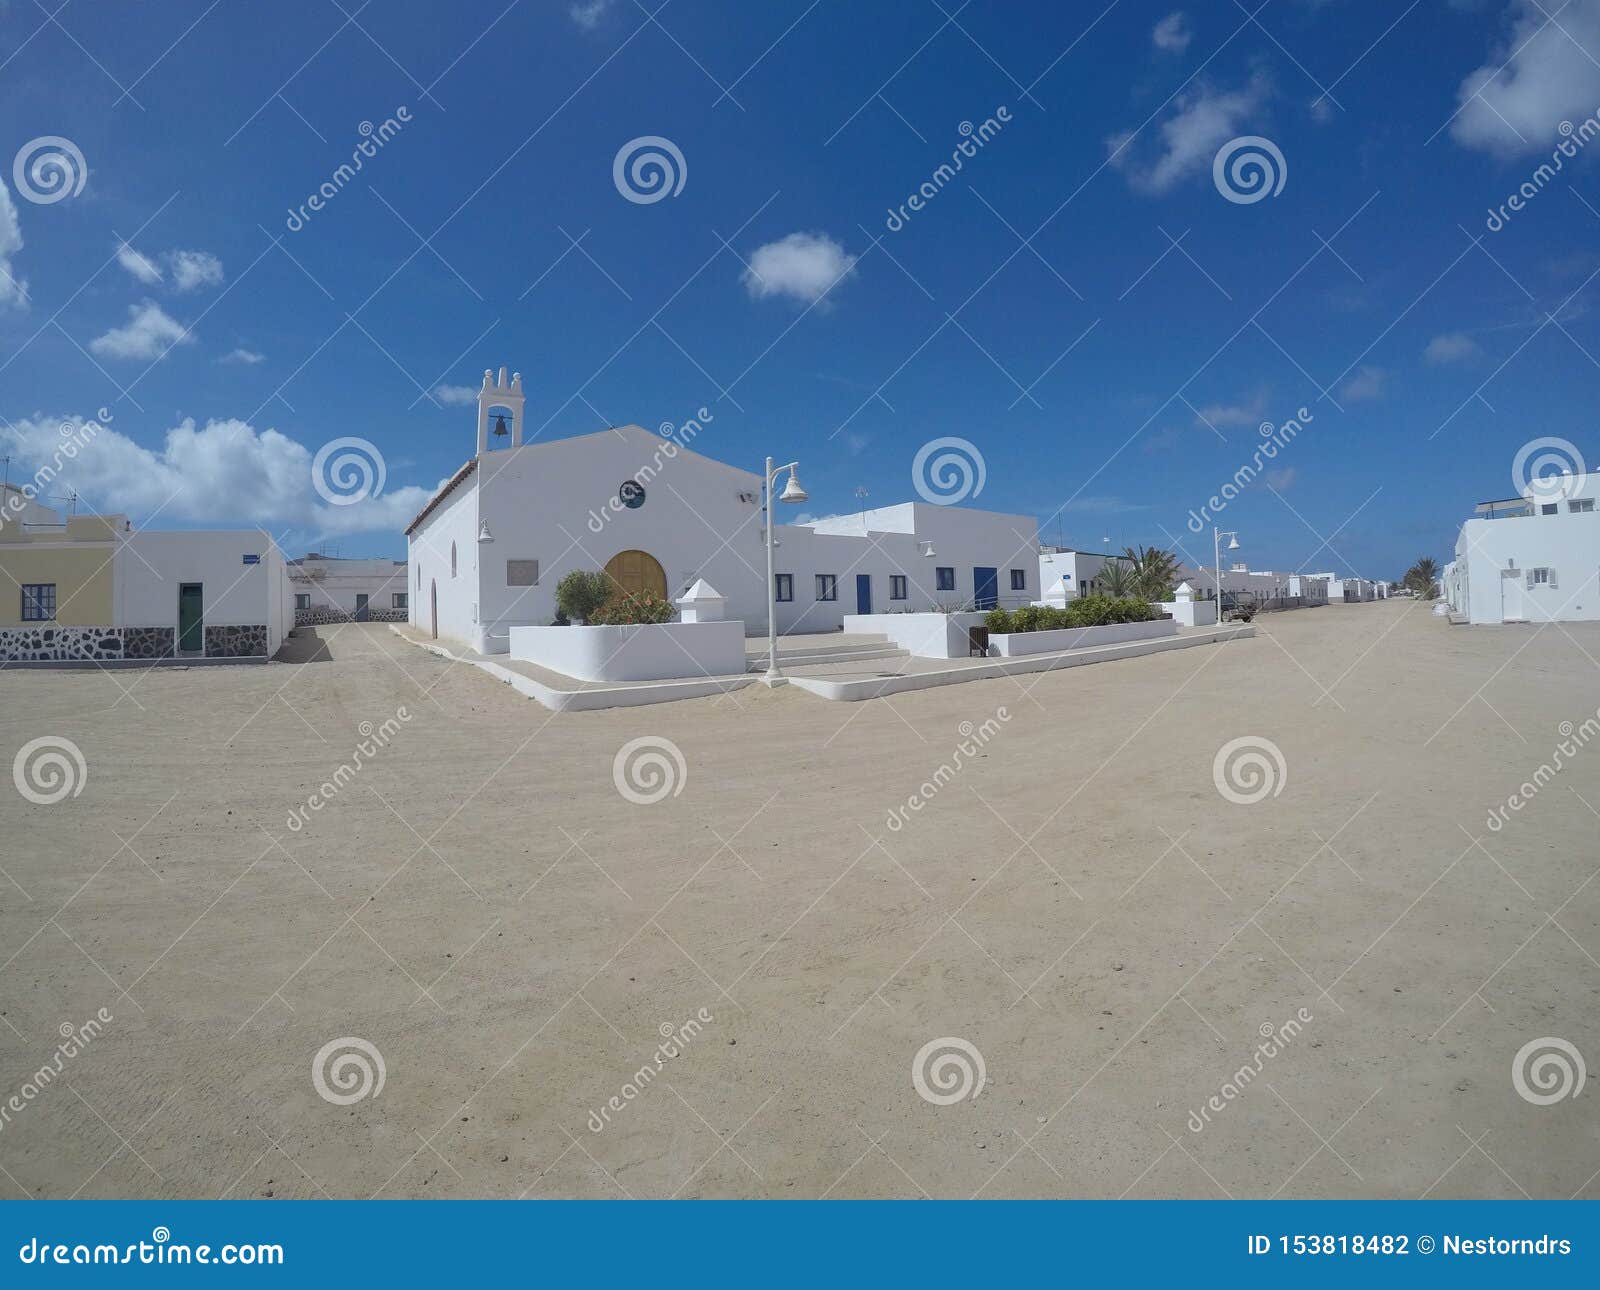 White church in the sand stock photo Image of islands 153818482